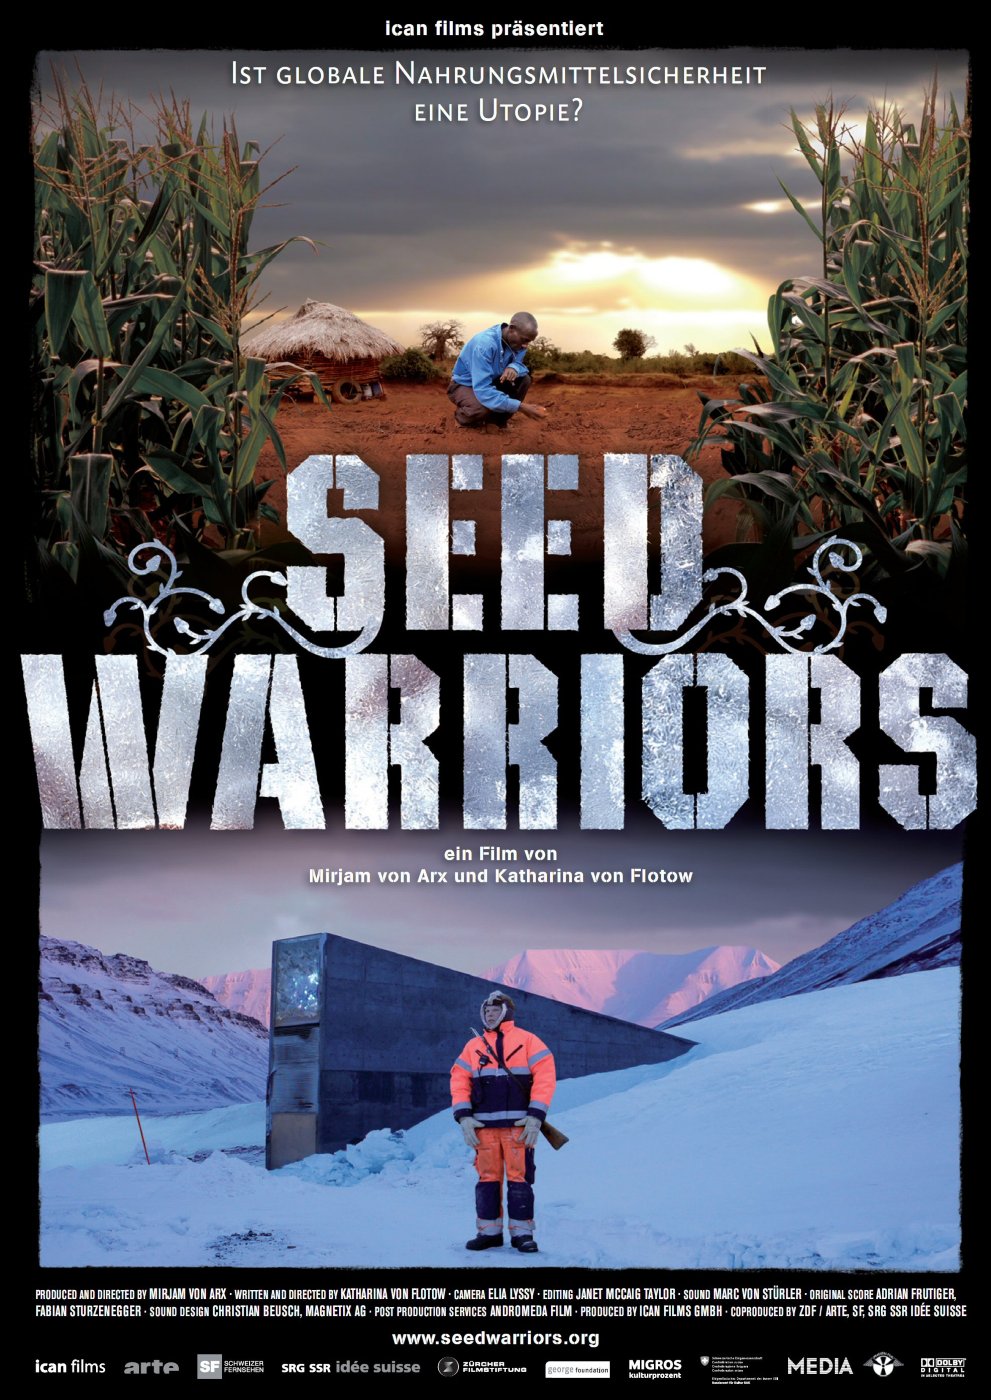 film-poster_seed-warriors